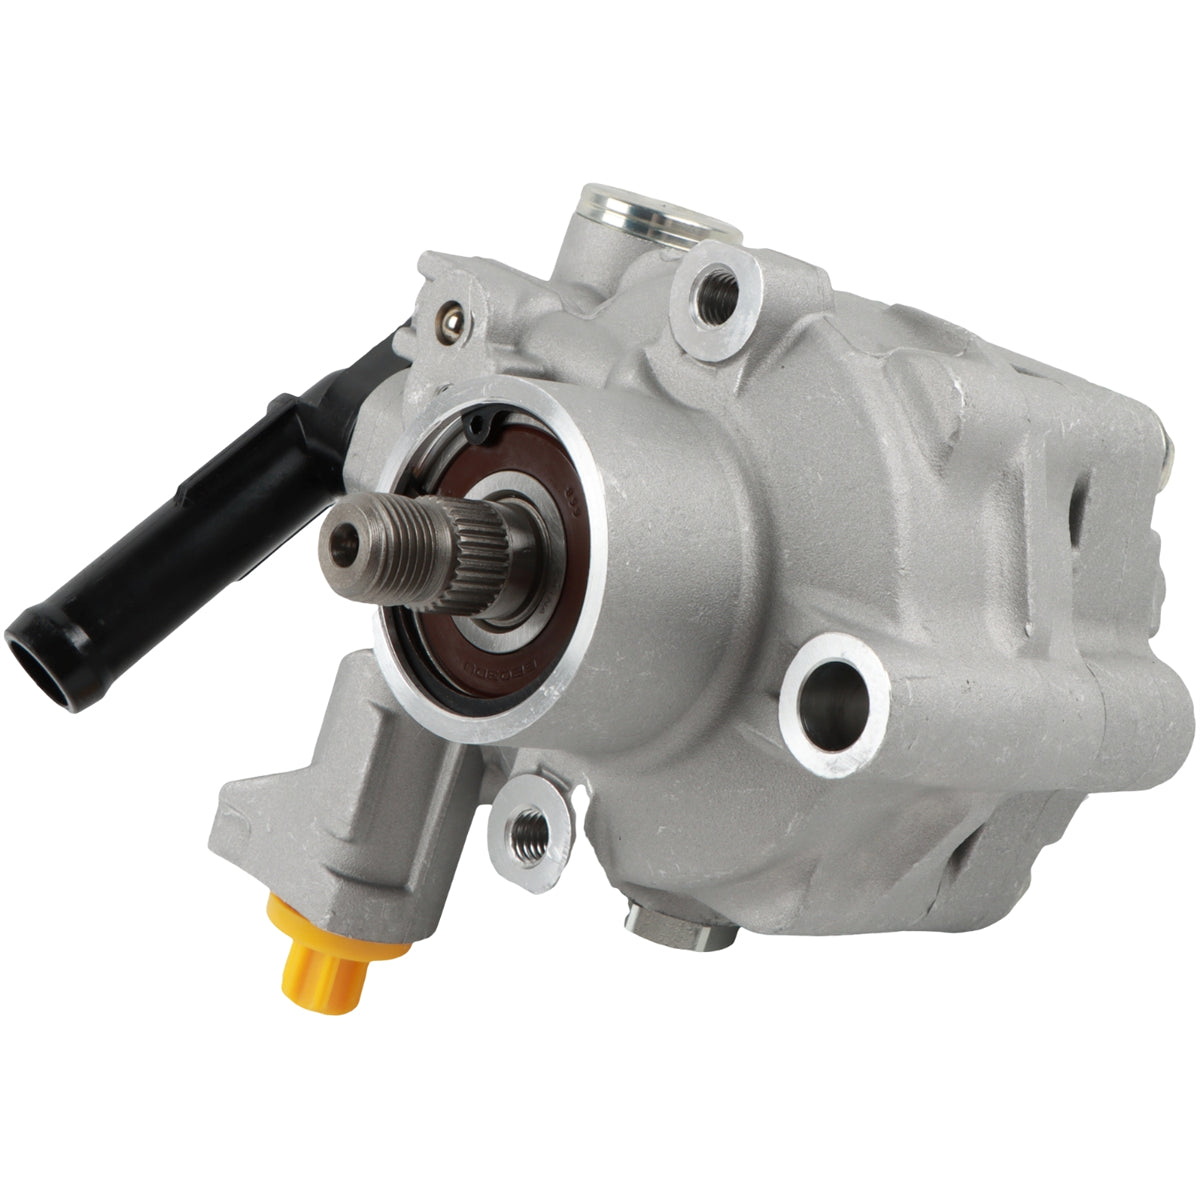 Daysyore® Power Steering Pump 21-5196 for 2005-2014 Subaru Forester Impreza Outback Legacy 2.5L